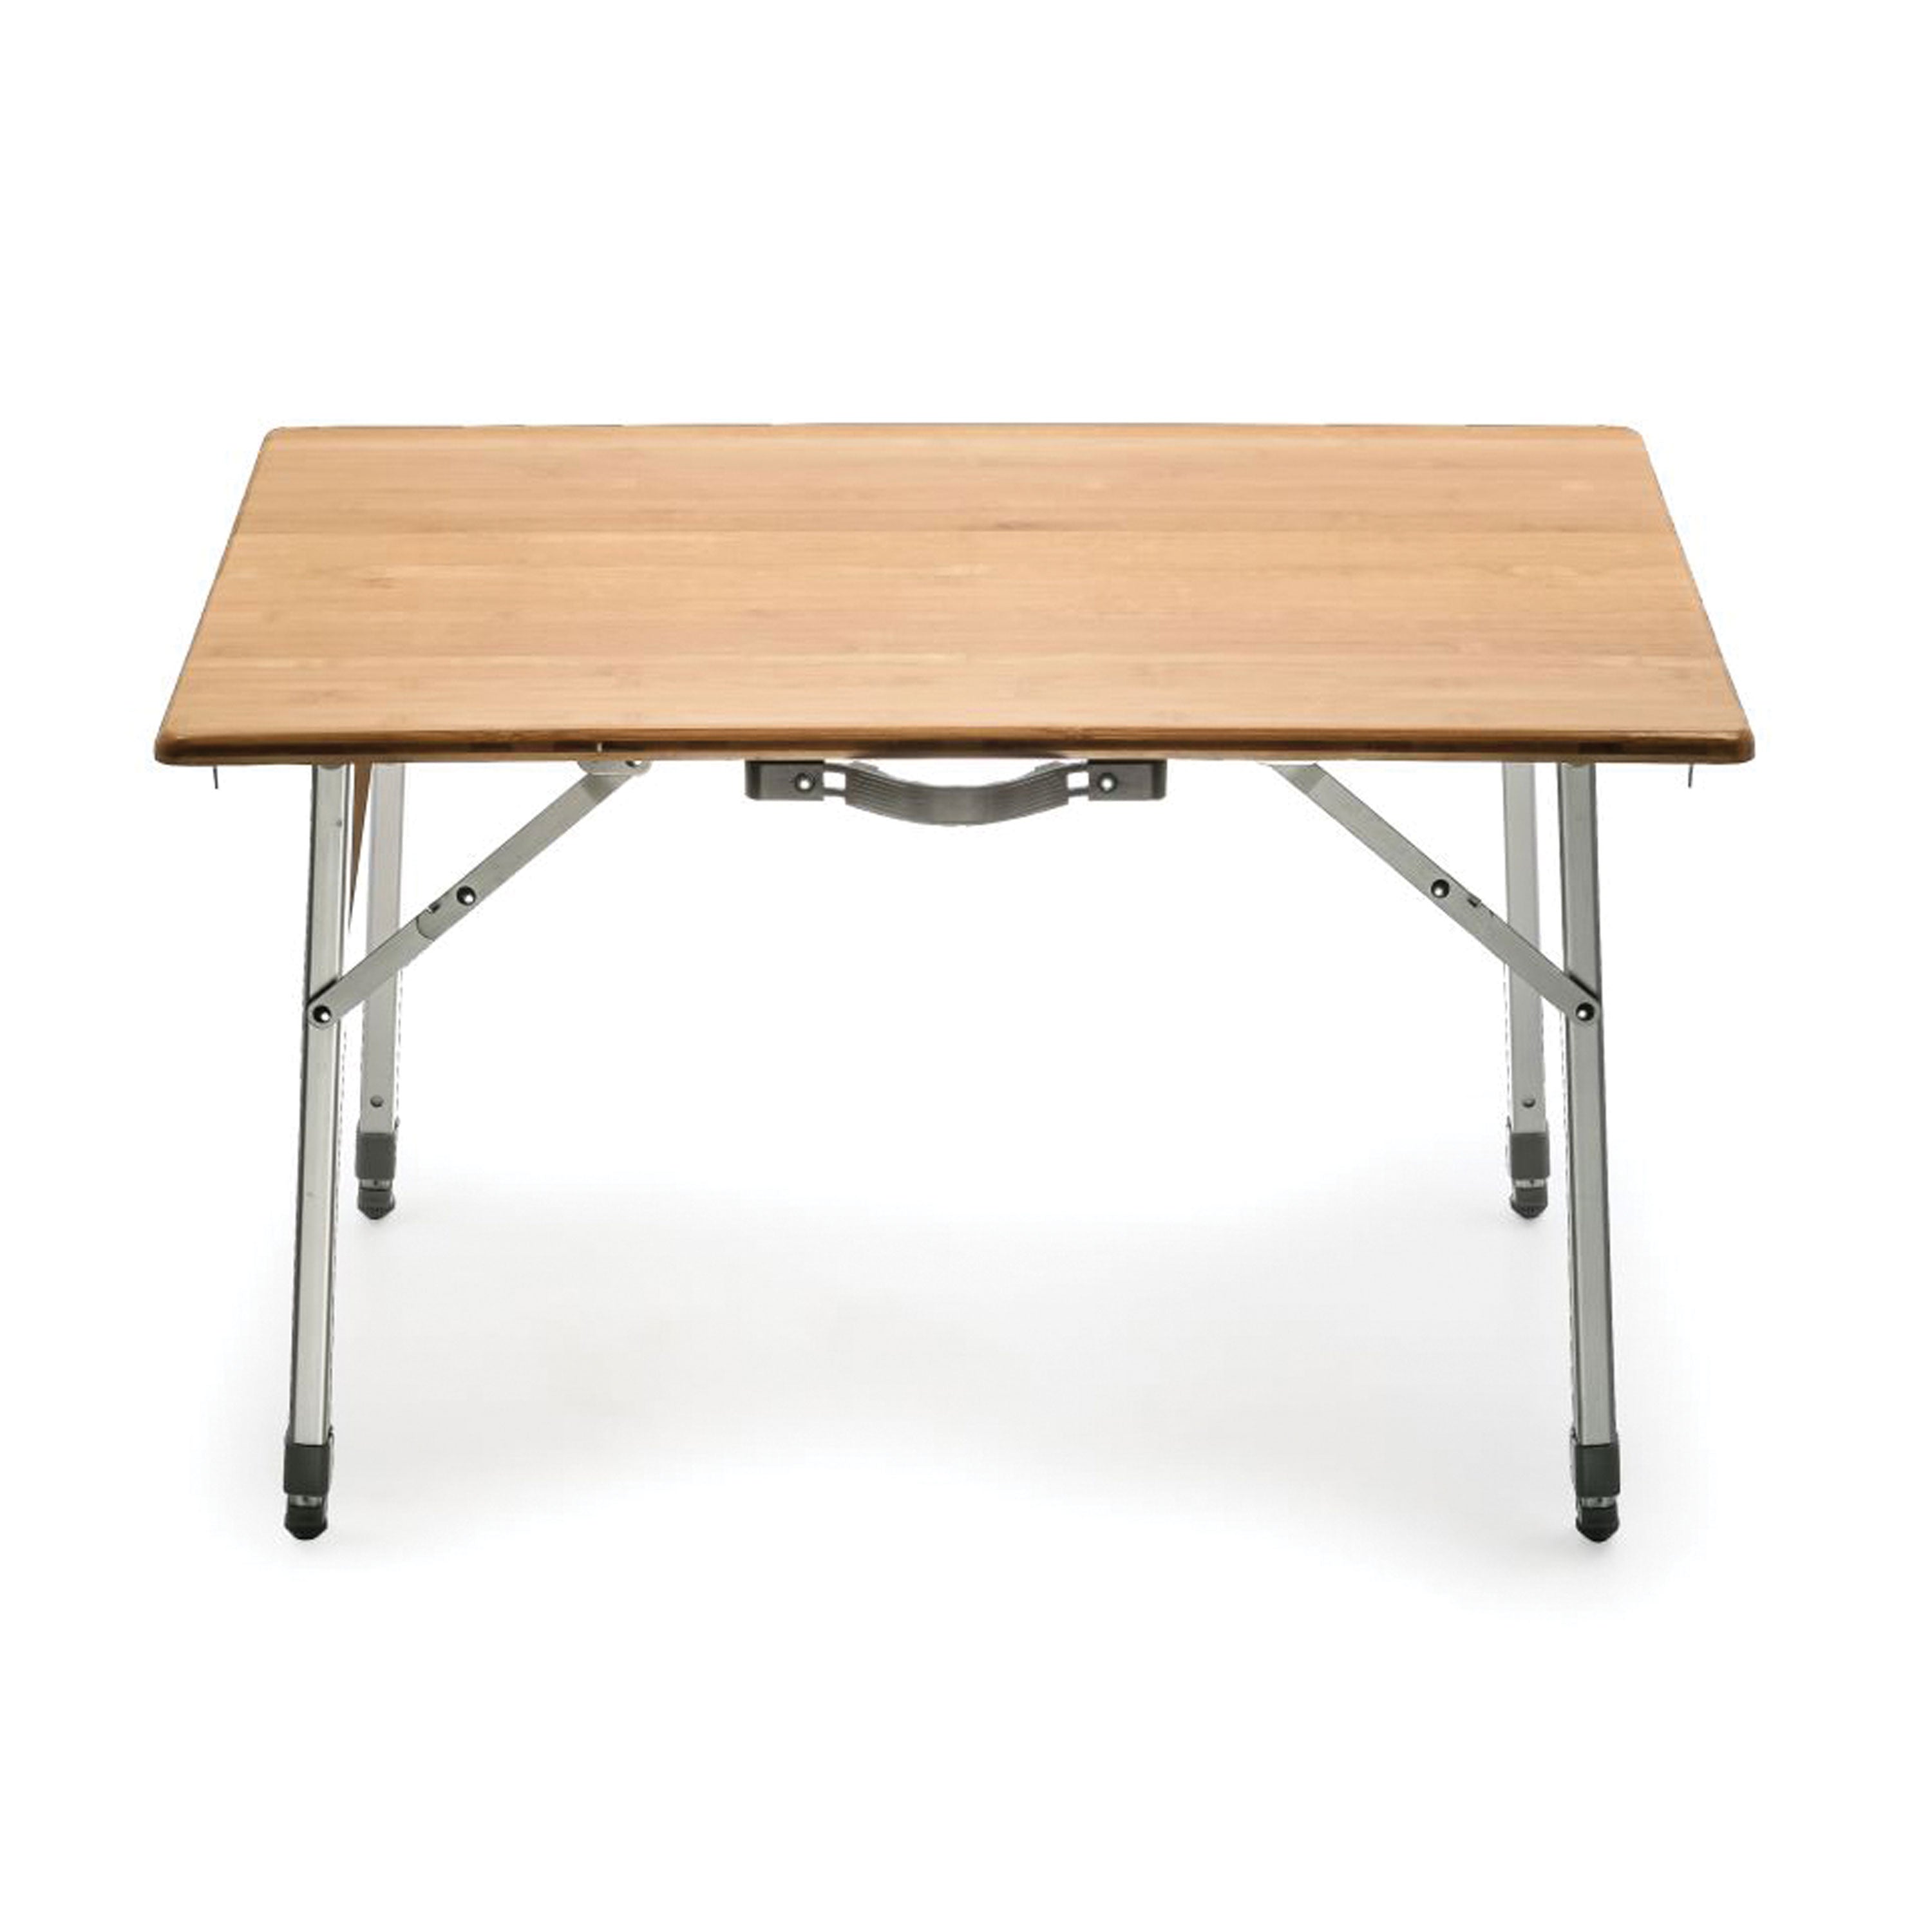 Camco 51893 Bamboo Folding Table Adjustable